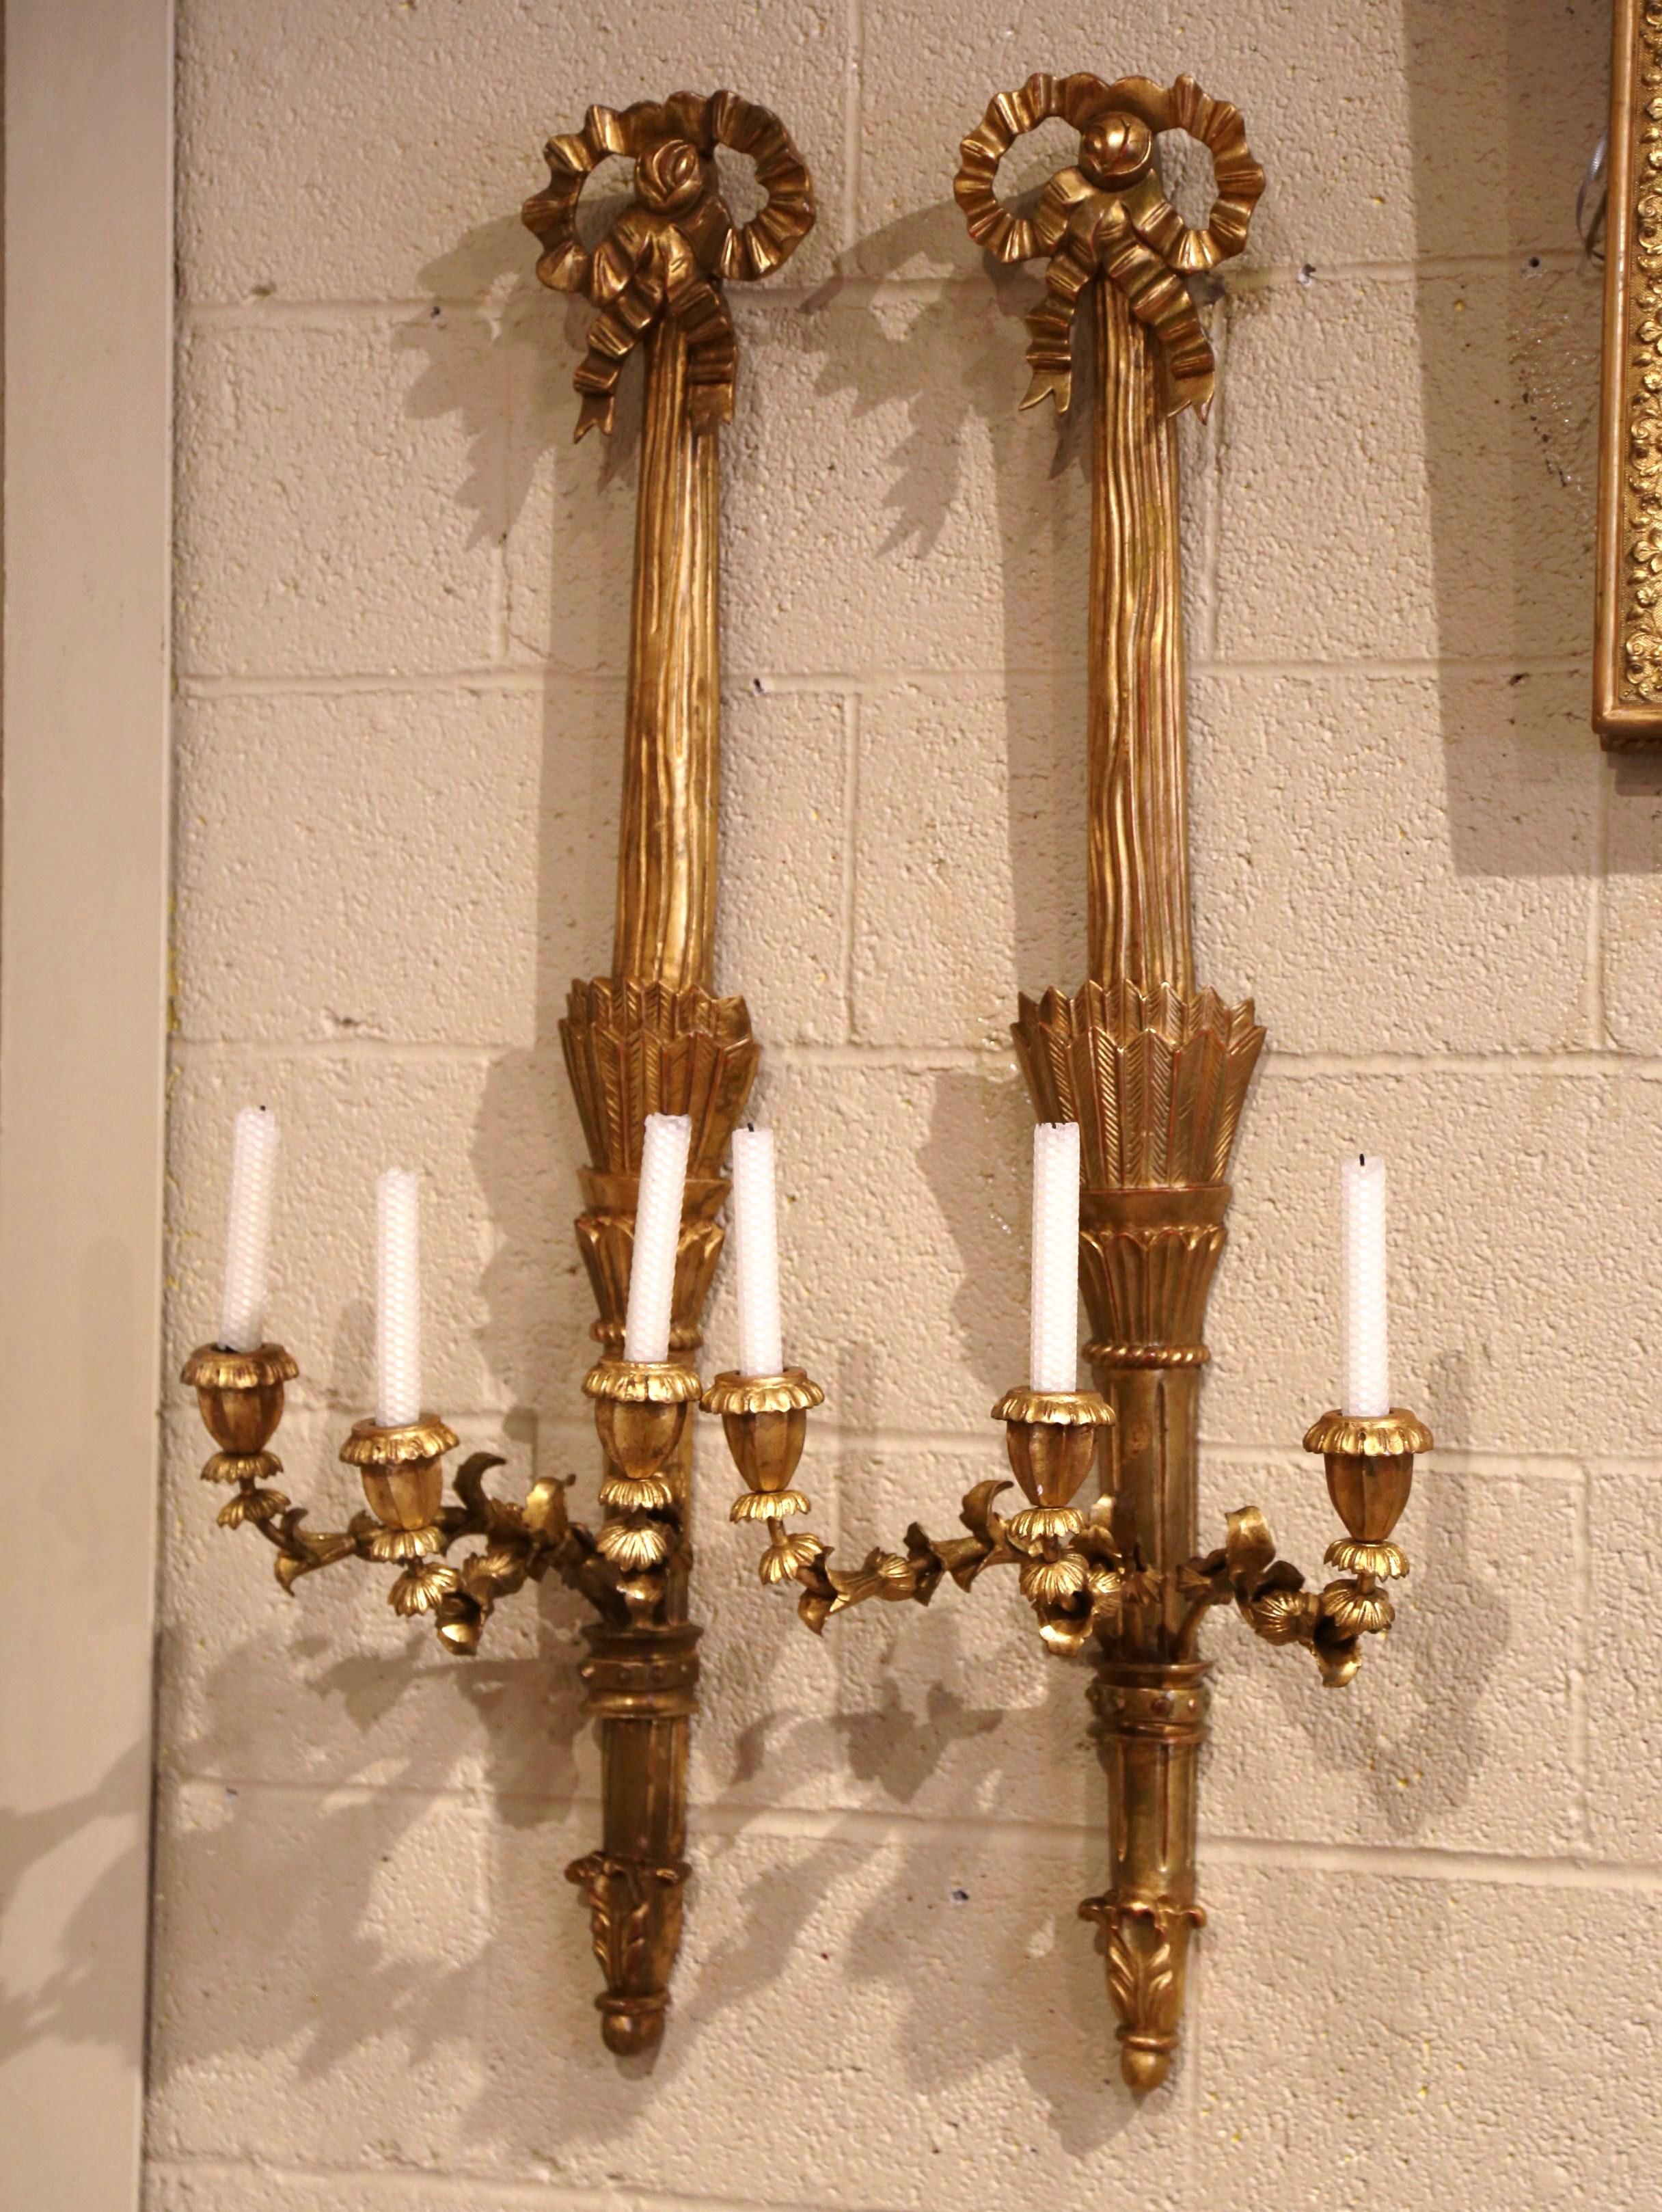 Decorate a living room, dining room or bedroom with this elegant and large pair of decorative sconces; crafted in France circa 1980, each light fixture has three metal arms decorated with floral and acanthus leaf motifs. The sconces feature the